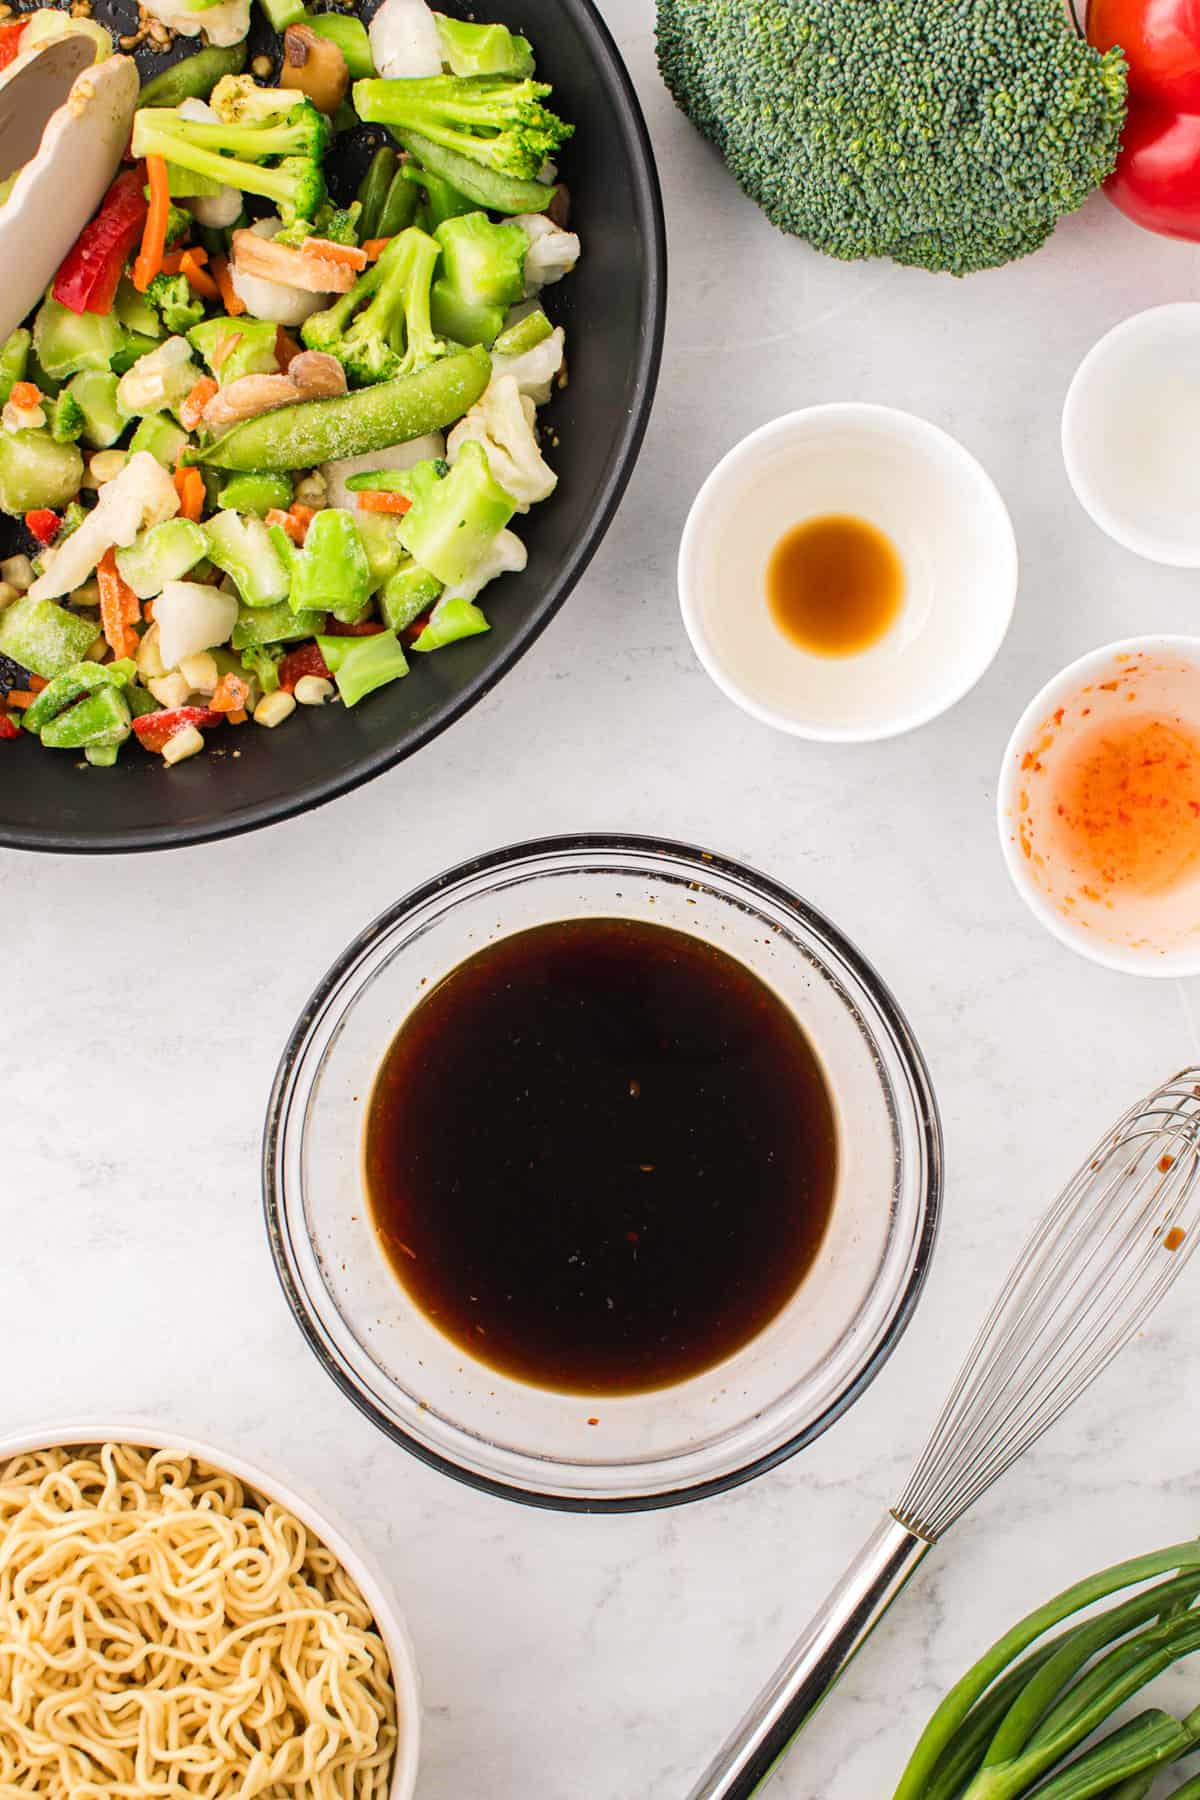 Dark brown stir-fry sauce in small glass bowl surrounded by other ingredients for the dish.